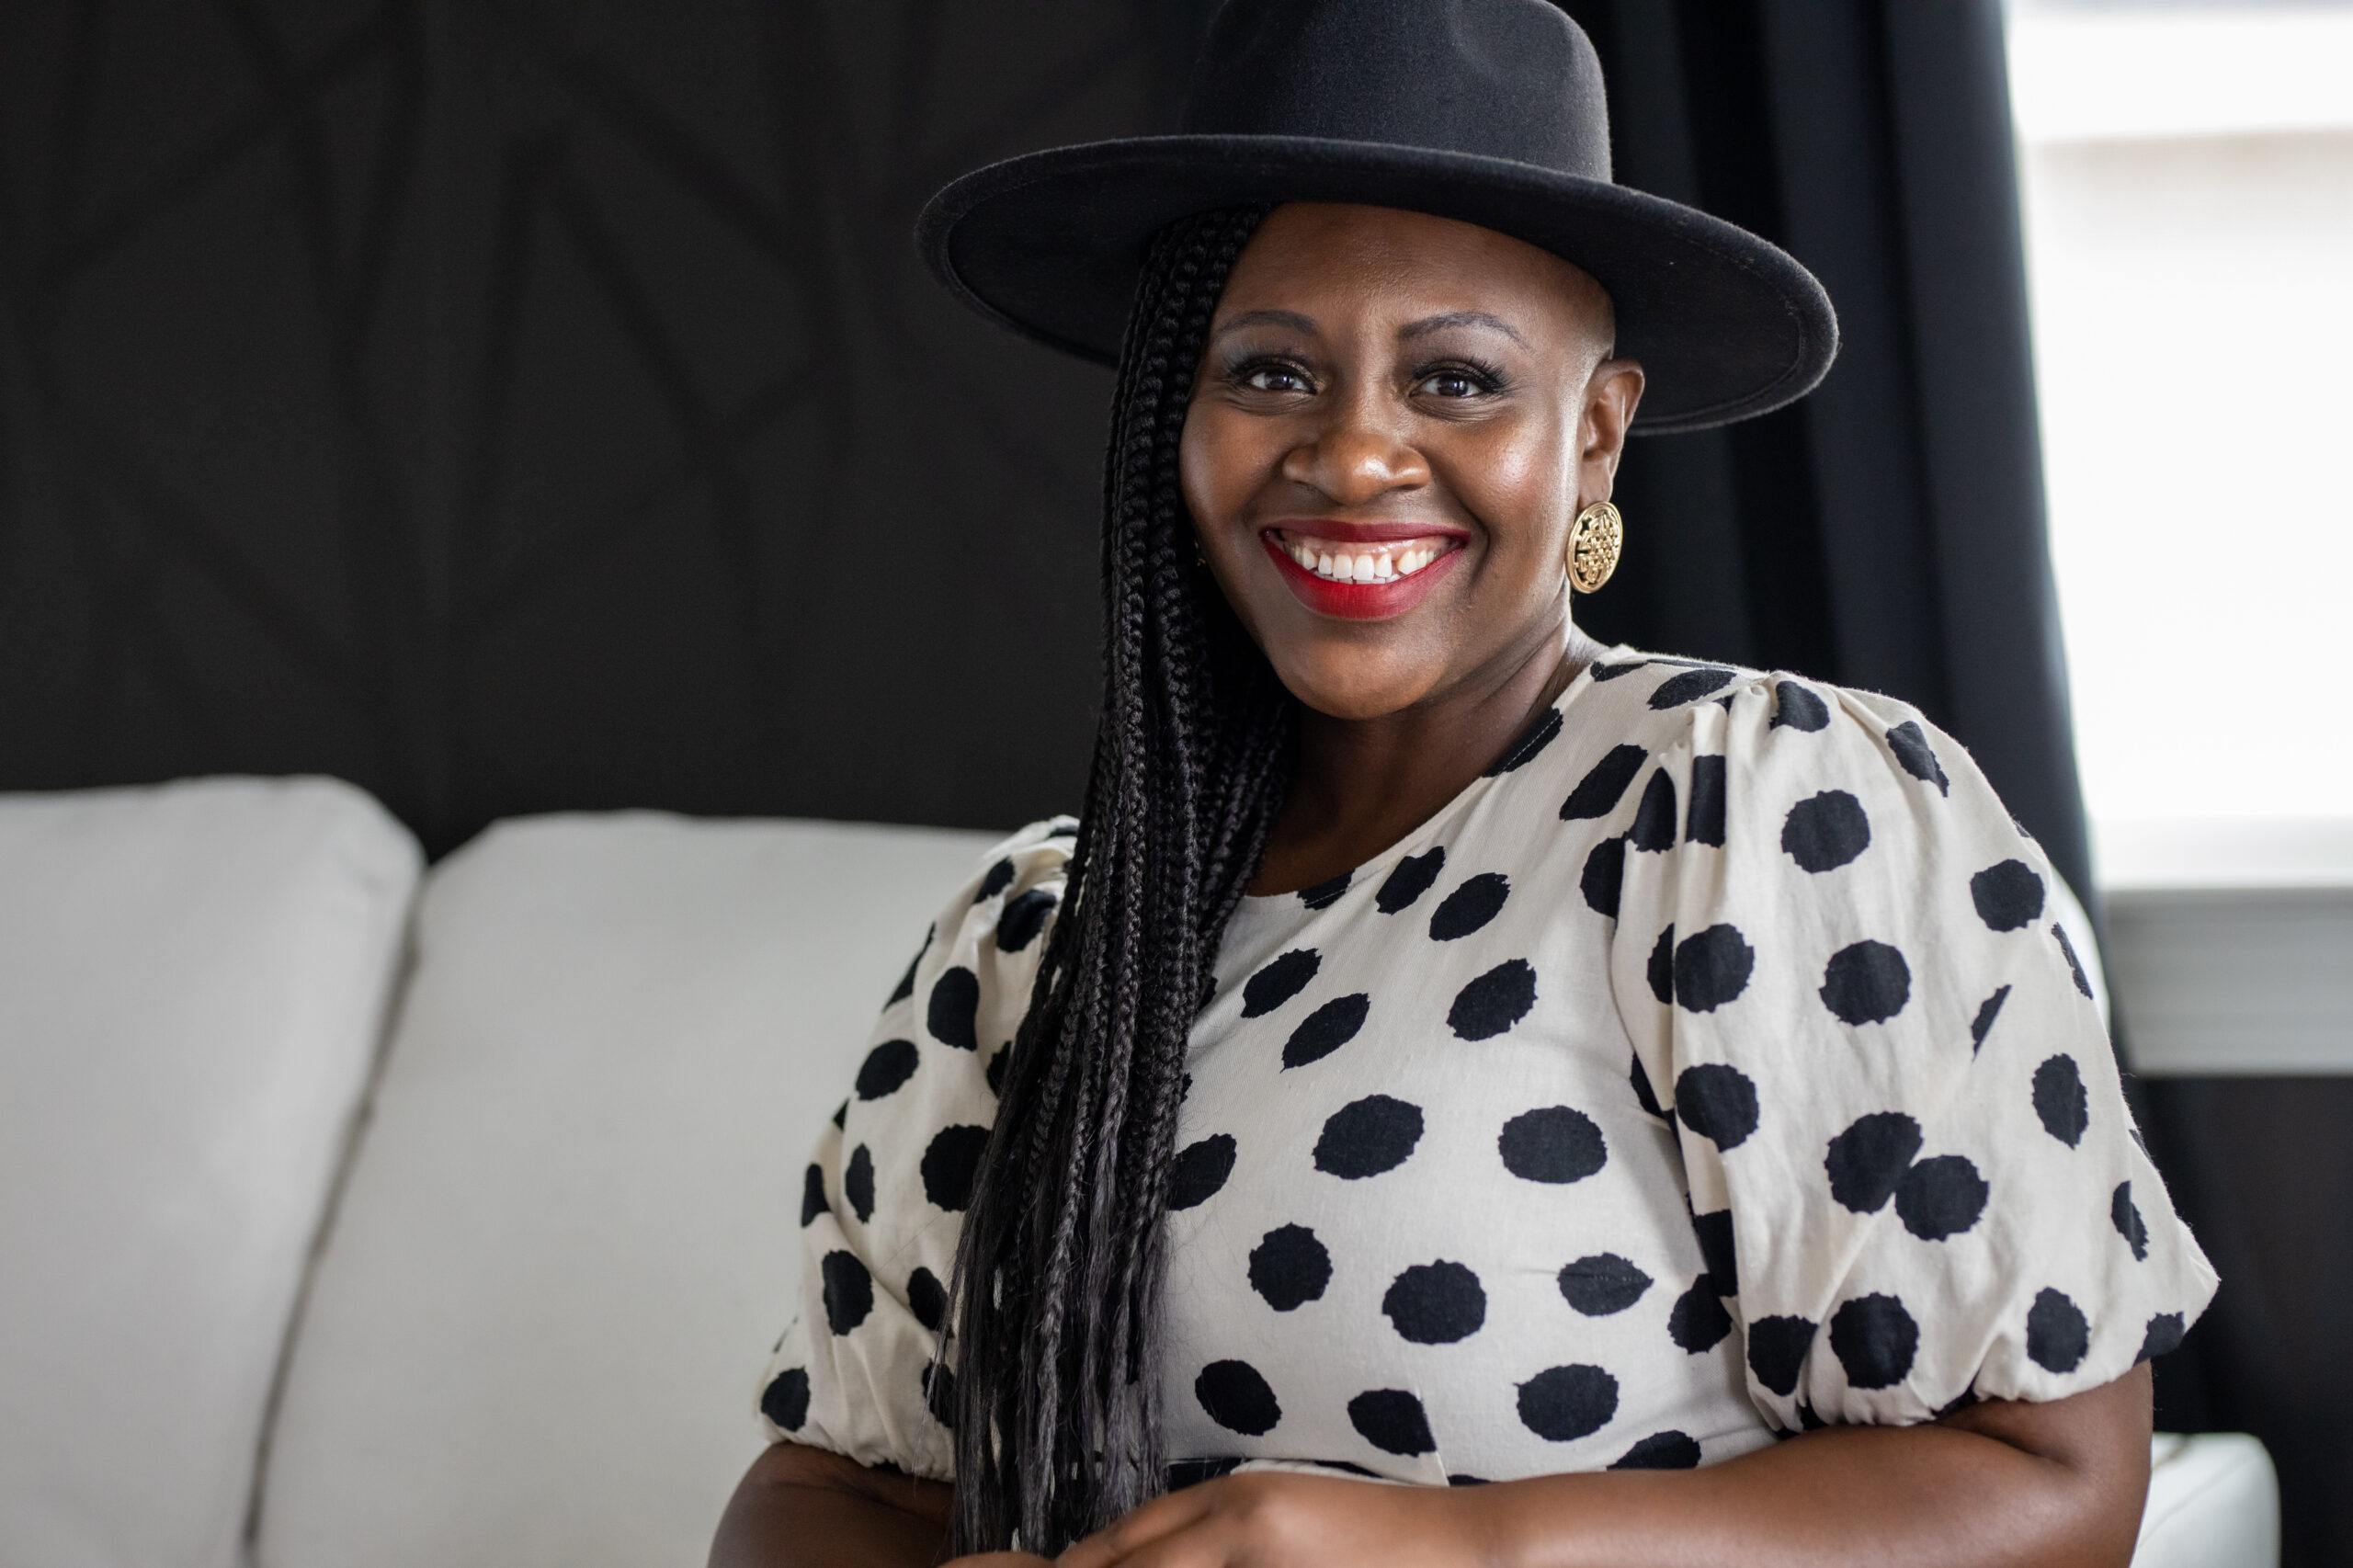 Pamela is a brown skin african american woman. She is sitting on a white sofa. She has on a white dress with black polka dots. She has on a black hat and is wearing red lipstick.